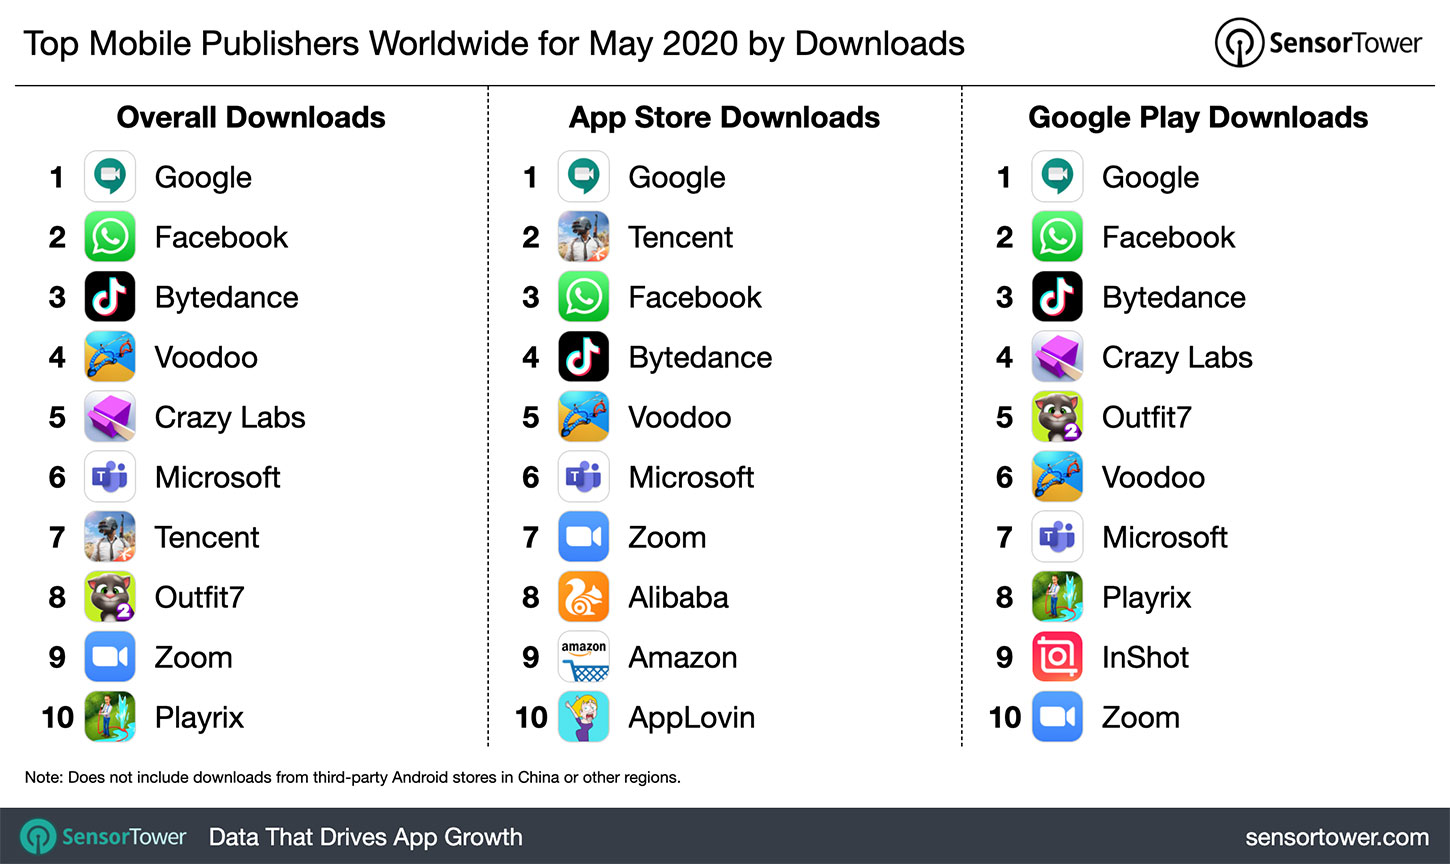 Top Mobile Publishers Worldwide for May 2020 by Downloads